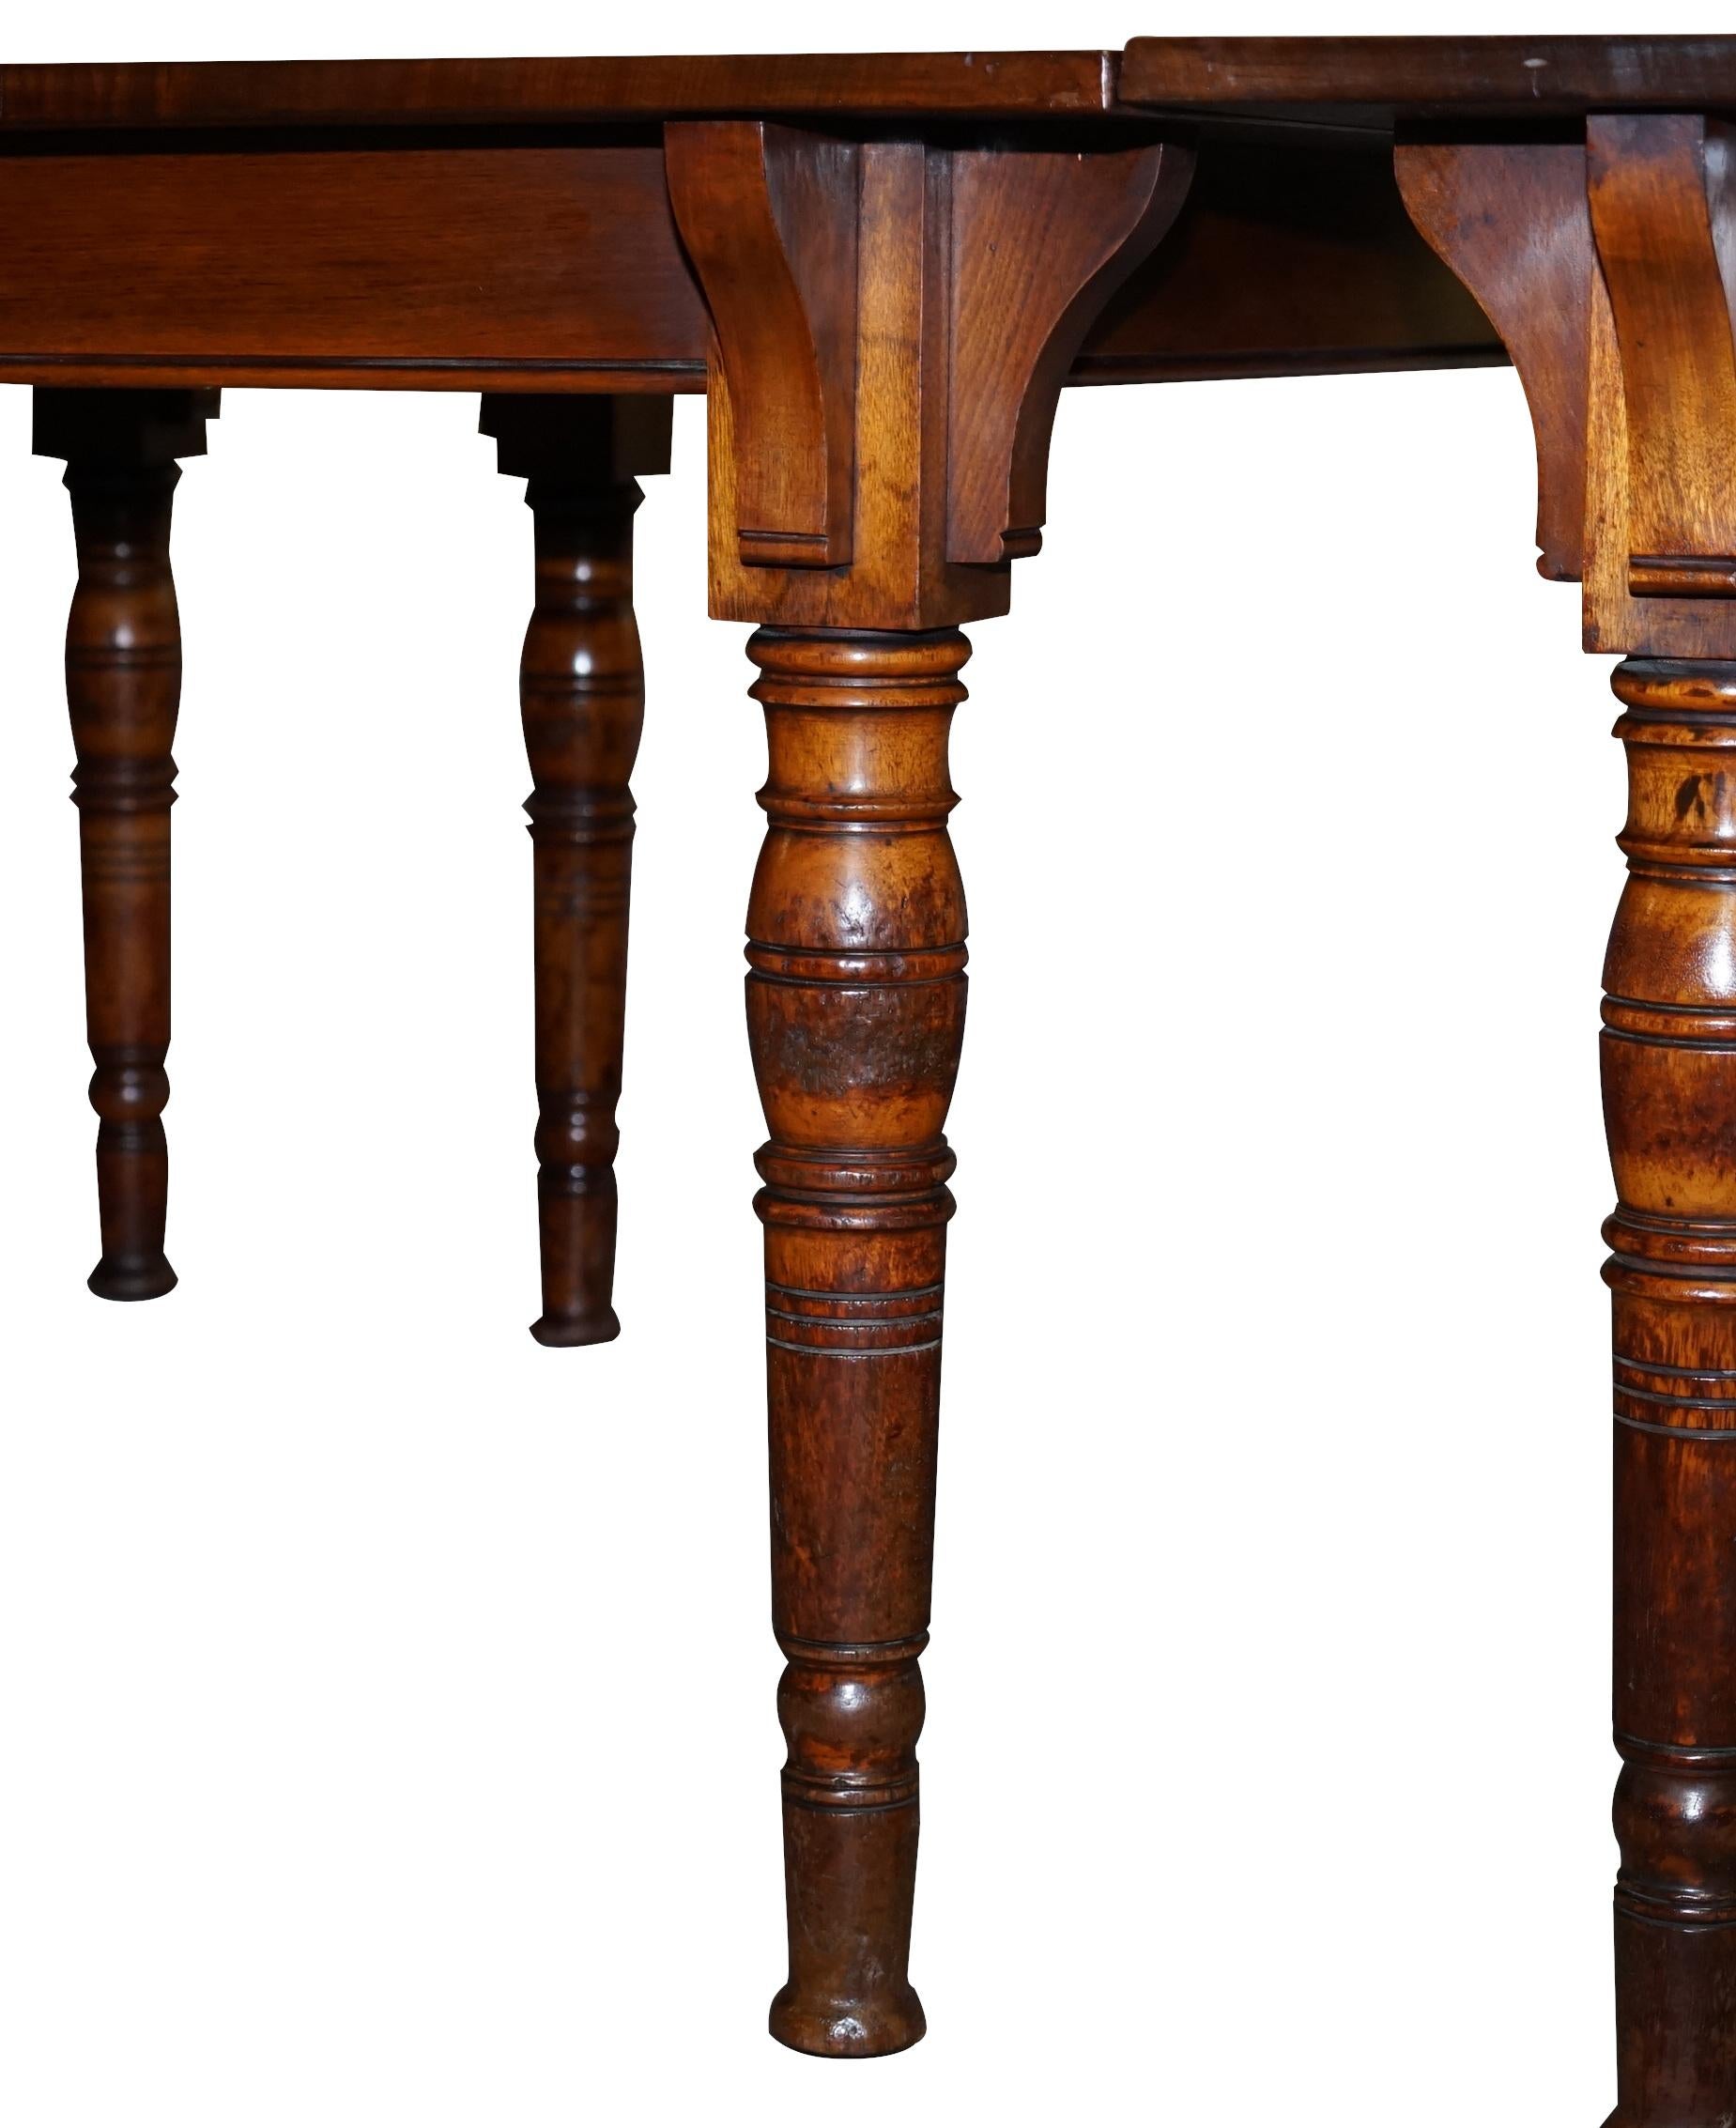 Rare Gillows Lancaster 1789-1795 George III American Walnut Dining Table For Sale 12